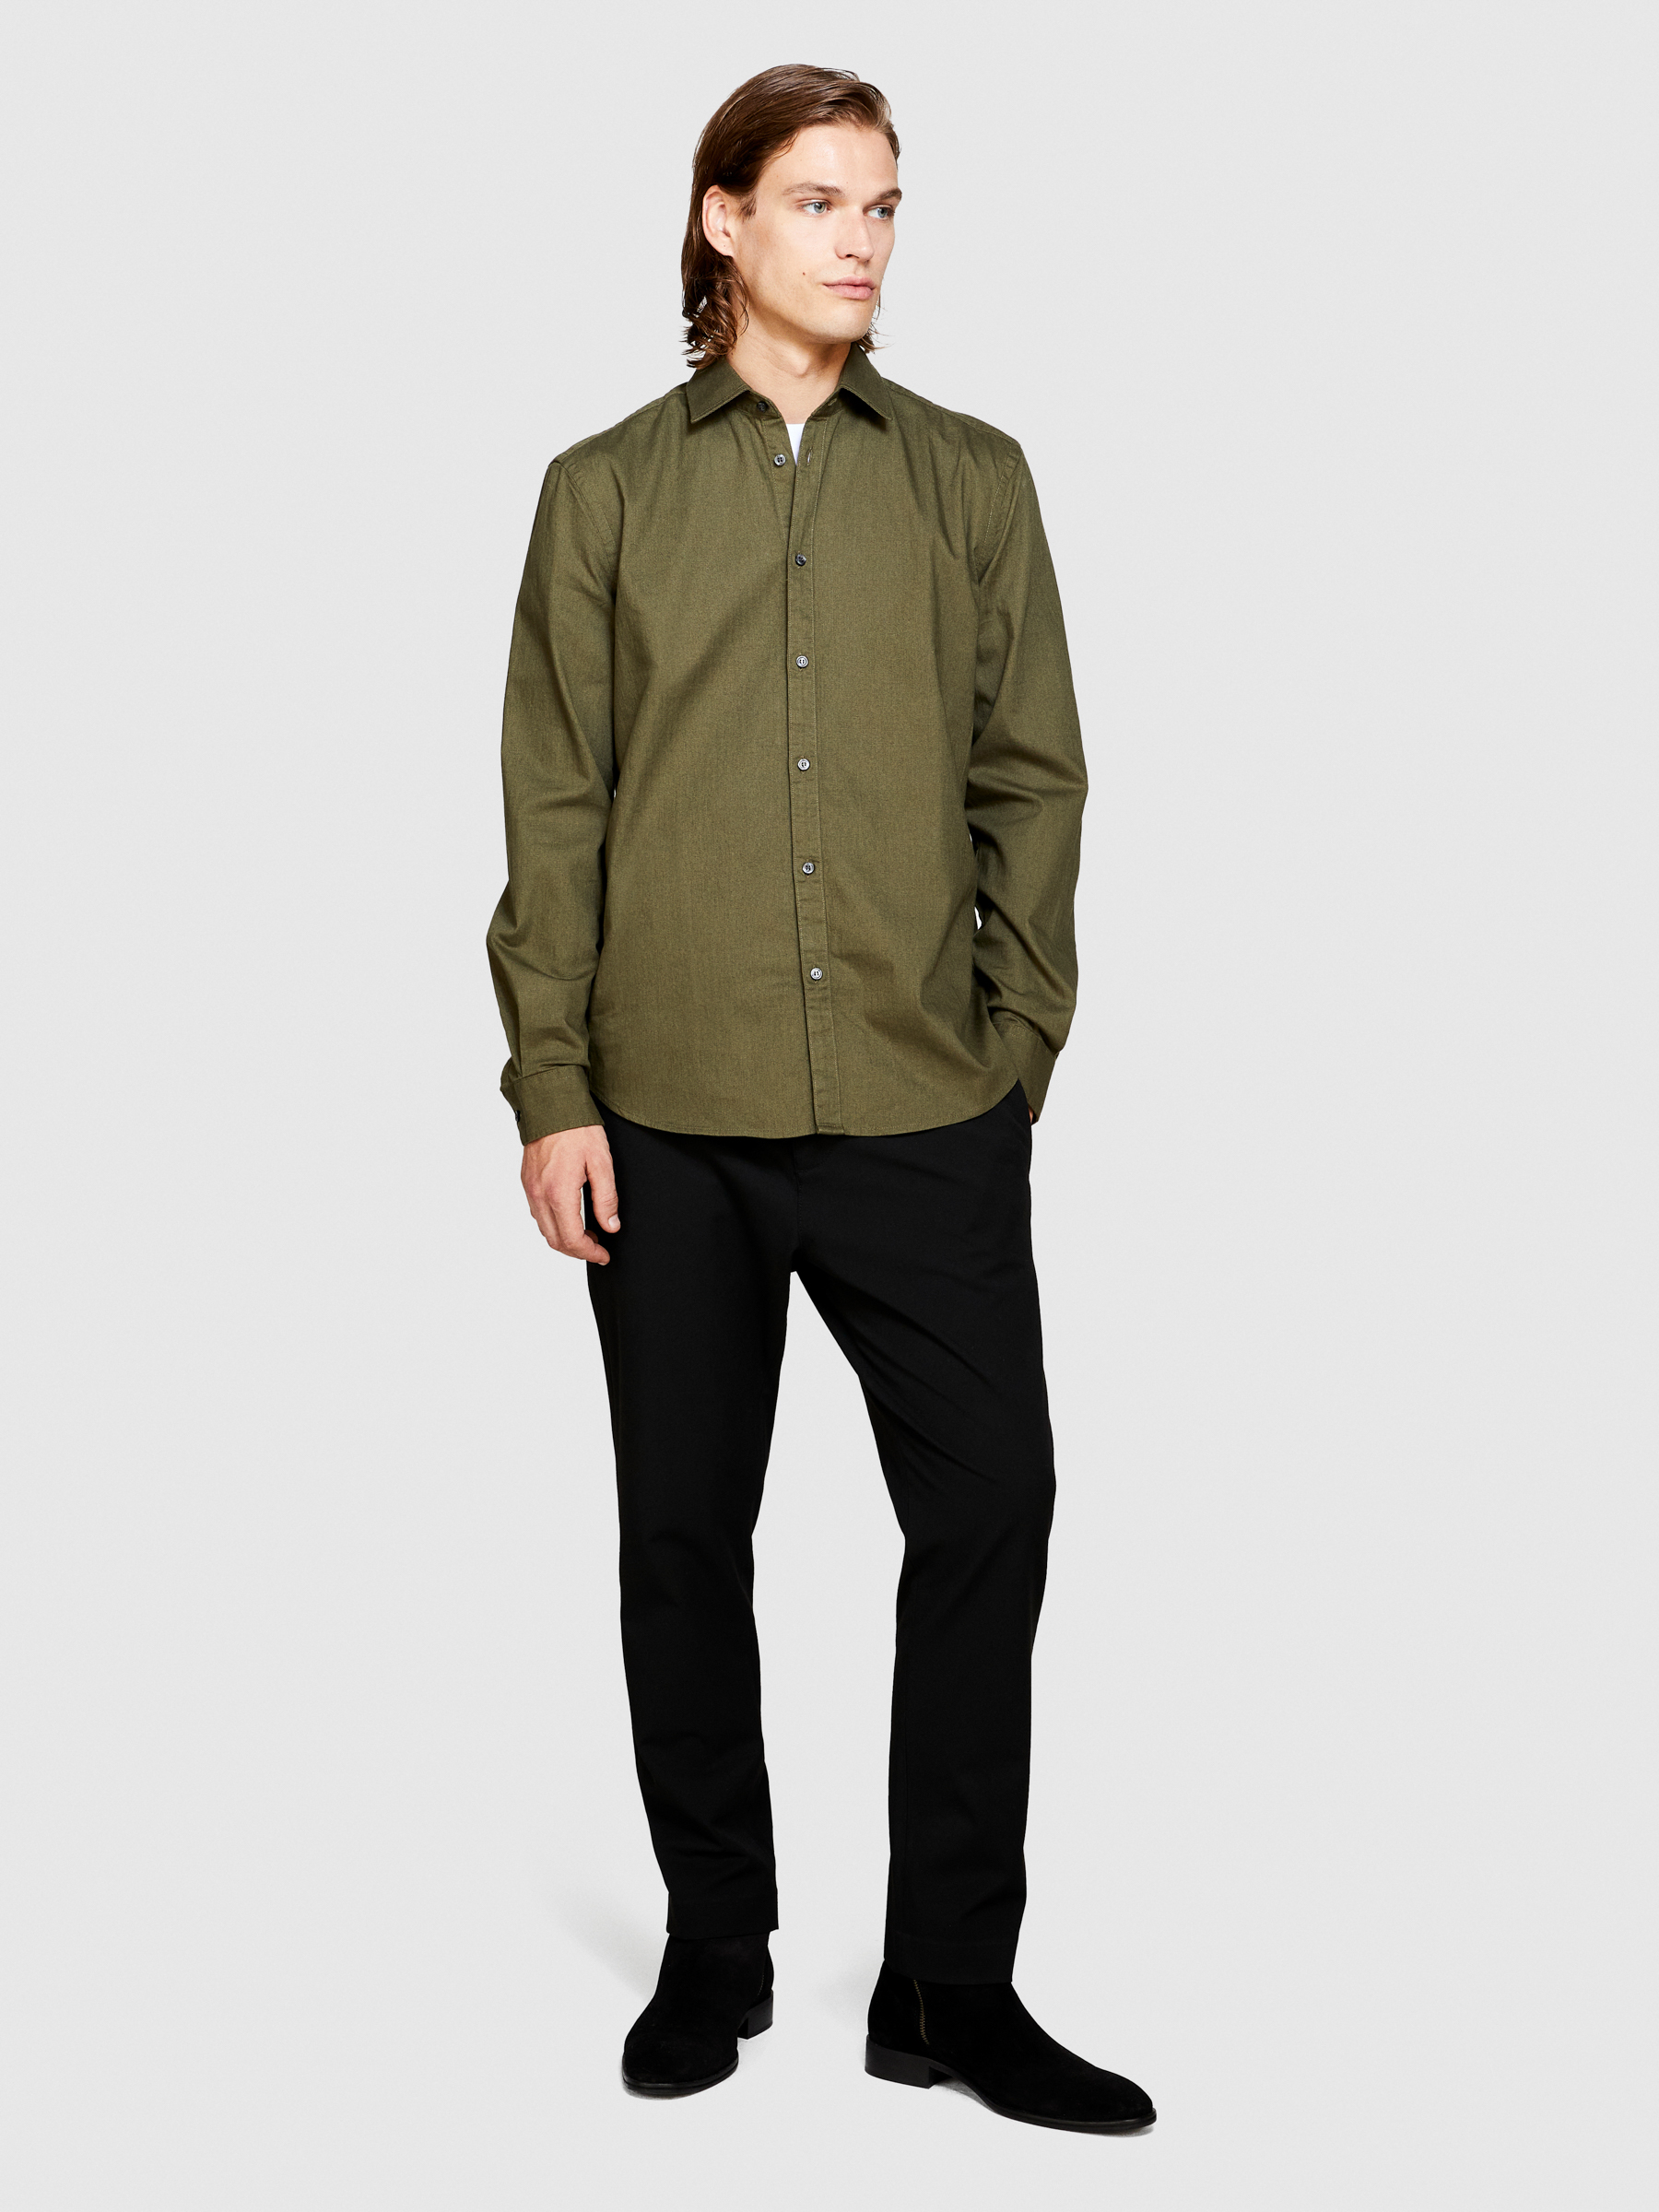 Sisley - Solid Colored Shirt, Man, Military Green, Size: 42